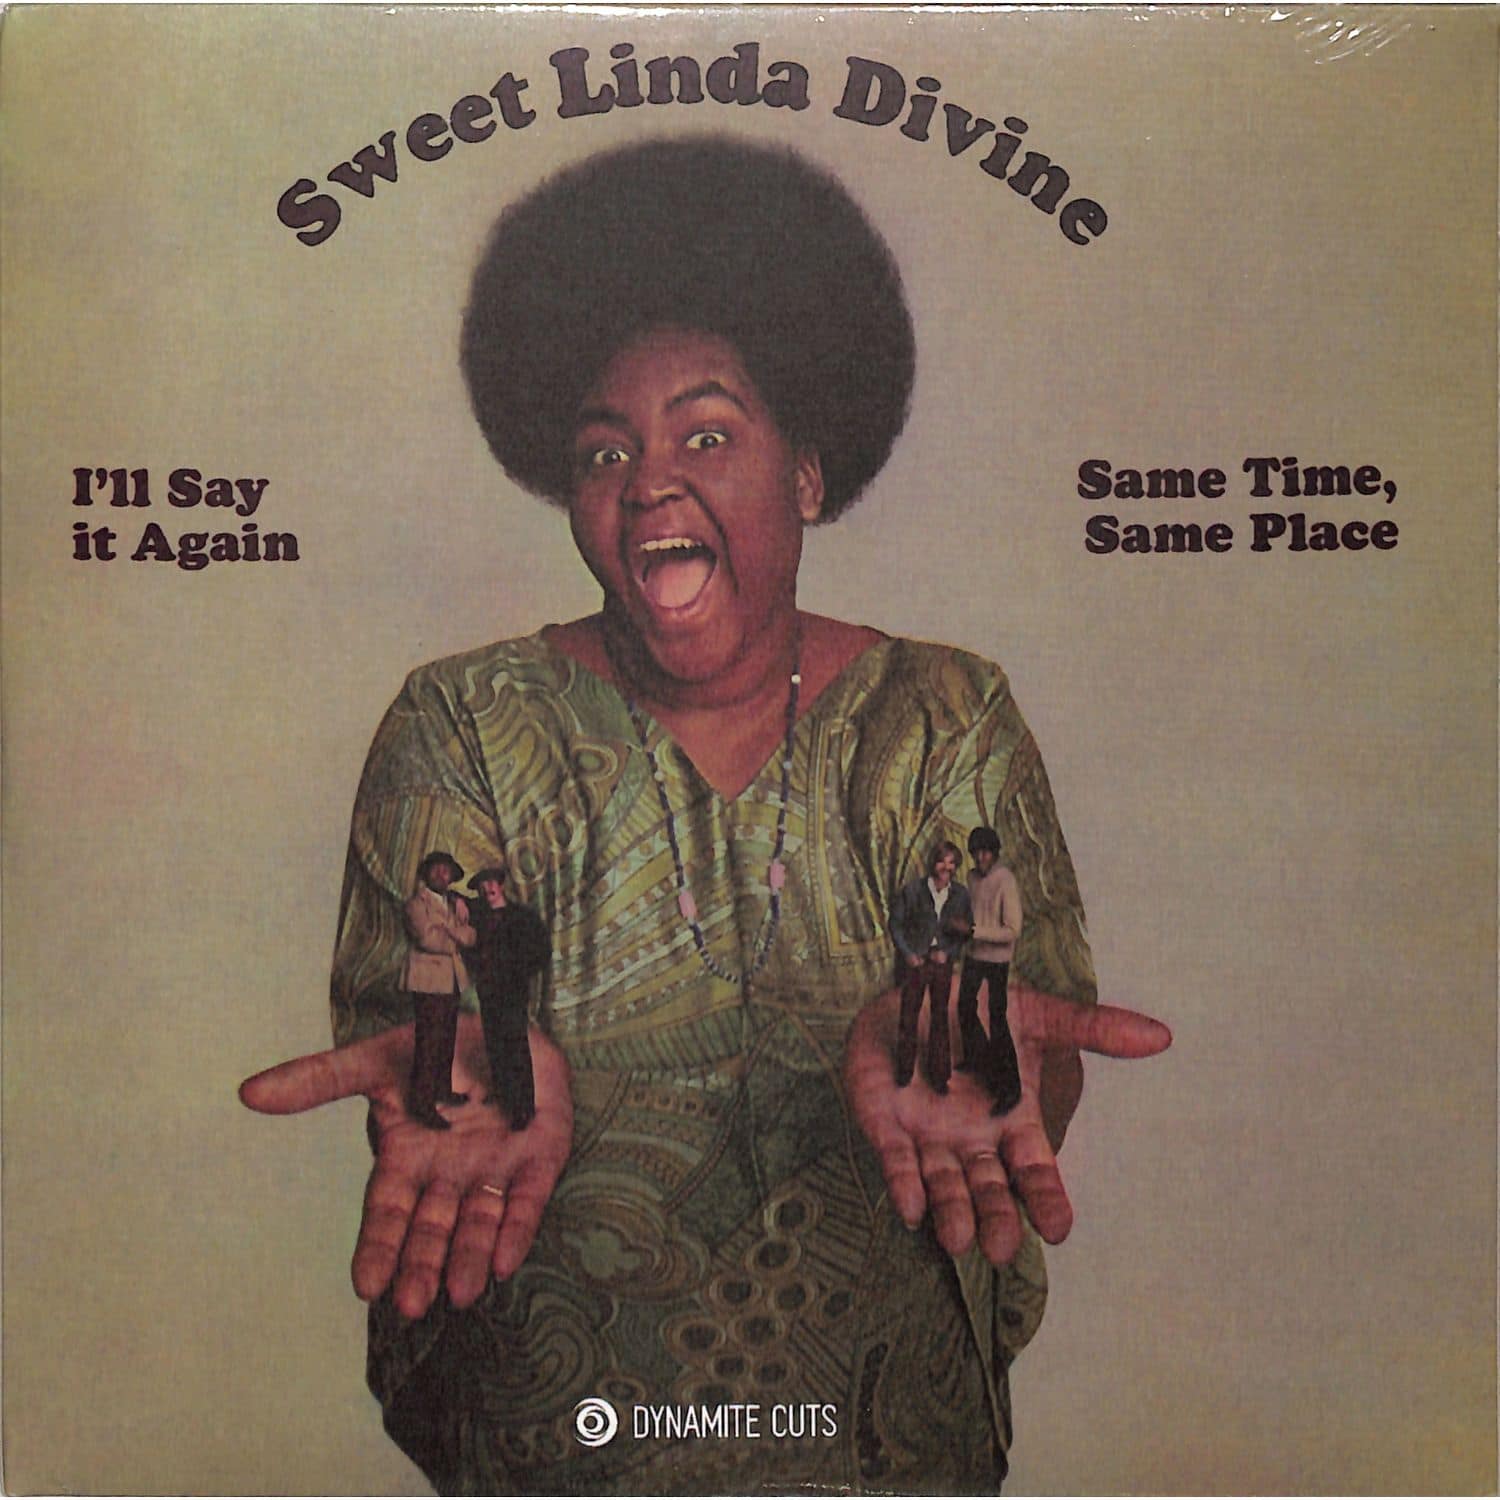 Sweet Linda Divine - ILL SAY IT AGAIN / WRONG TIME RIGHT PLACE 